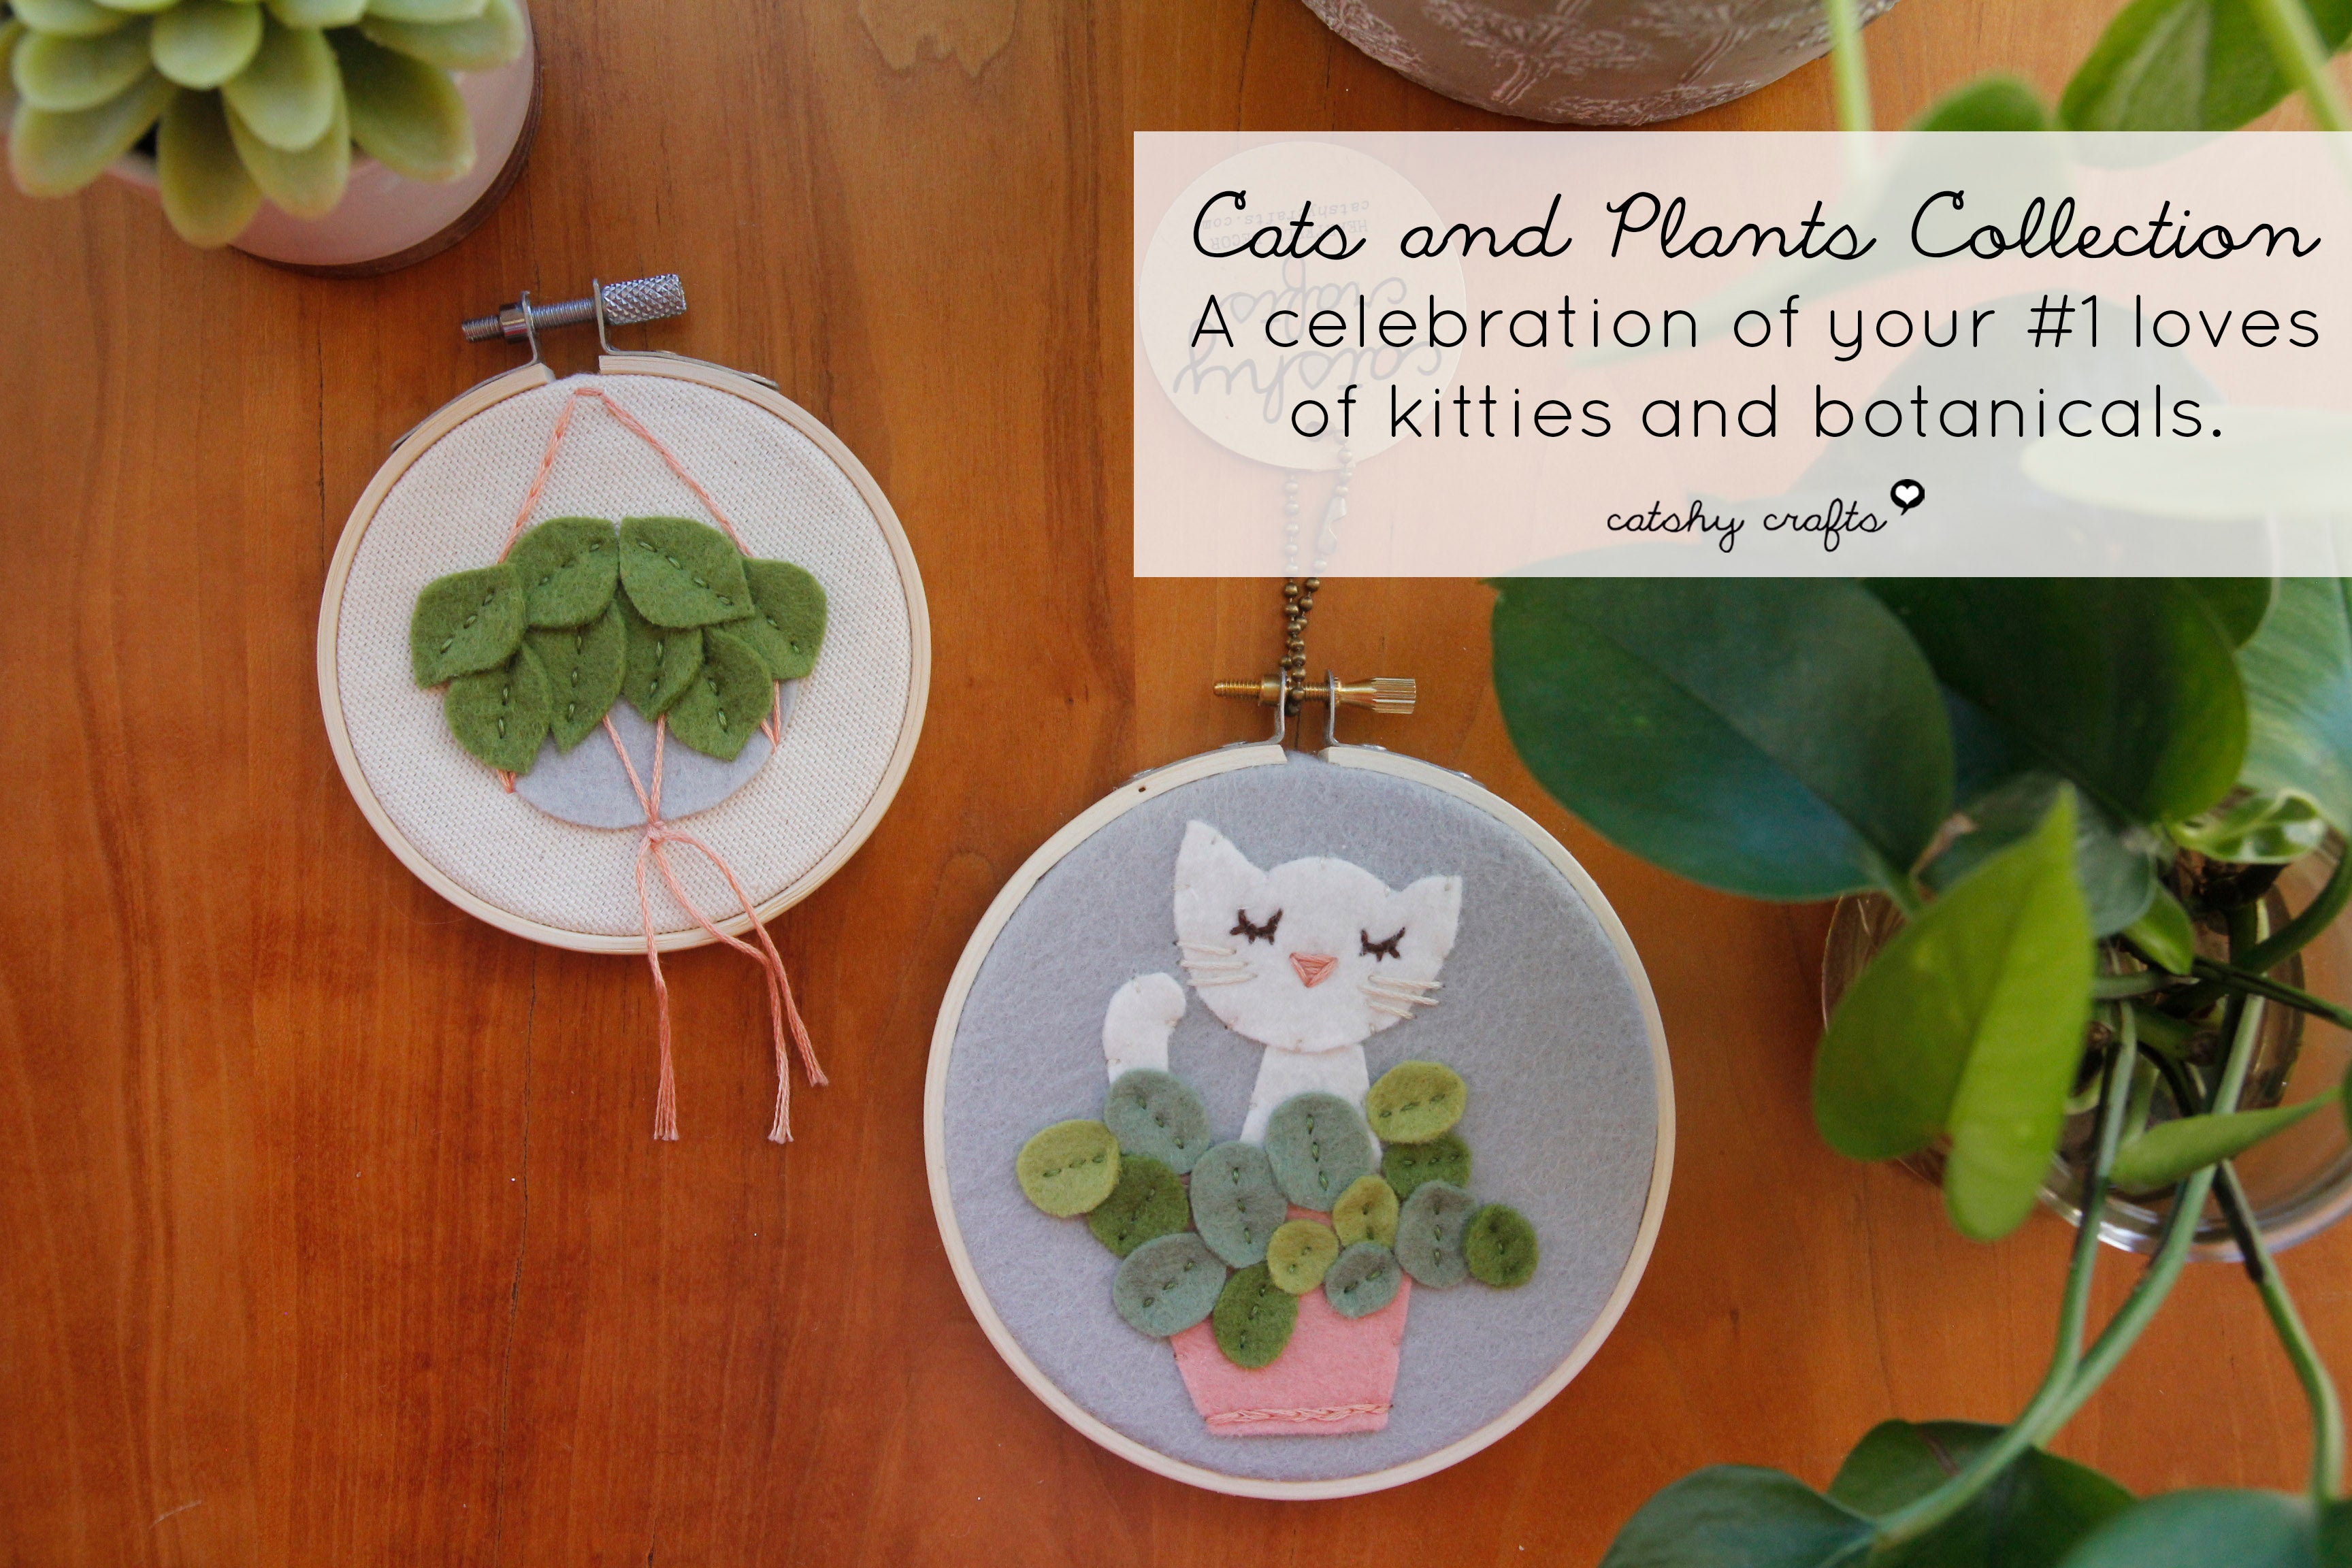 Calling all cat and plant lovers!